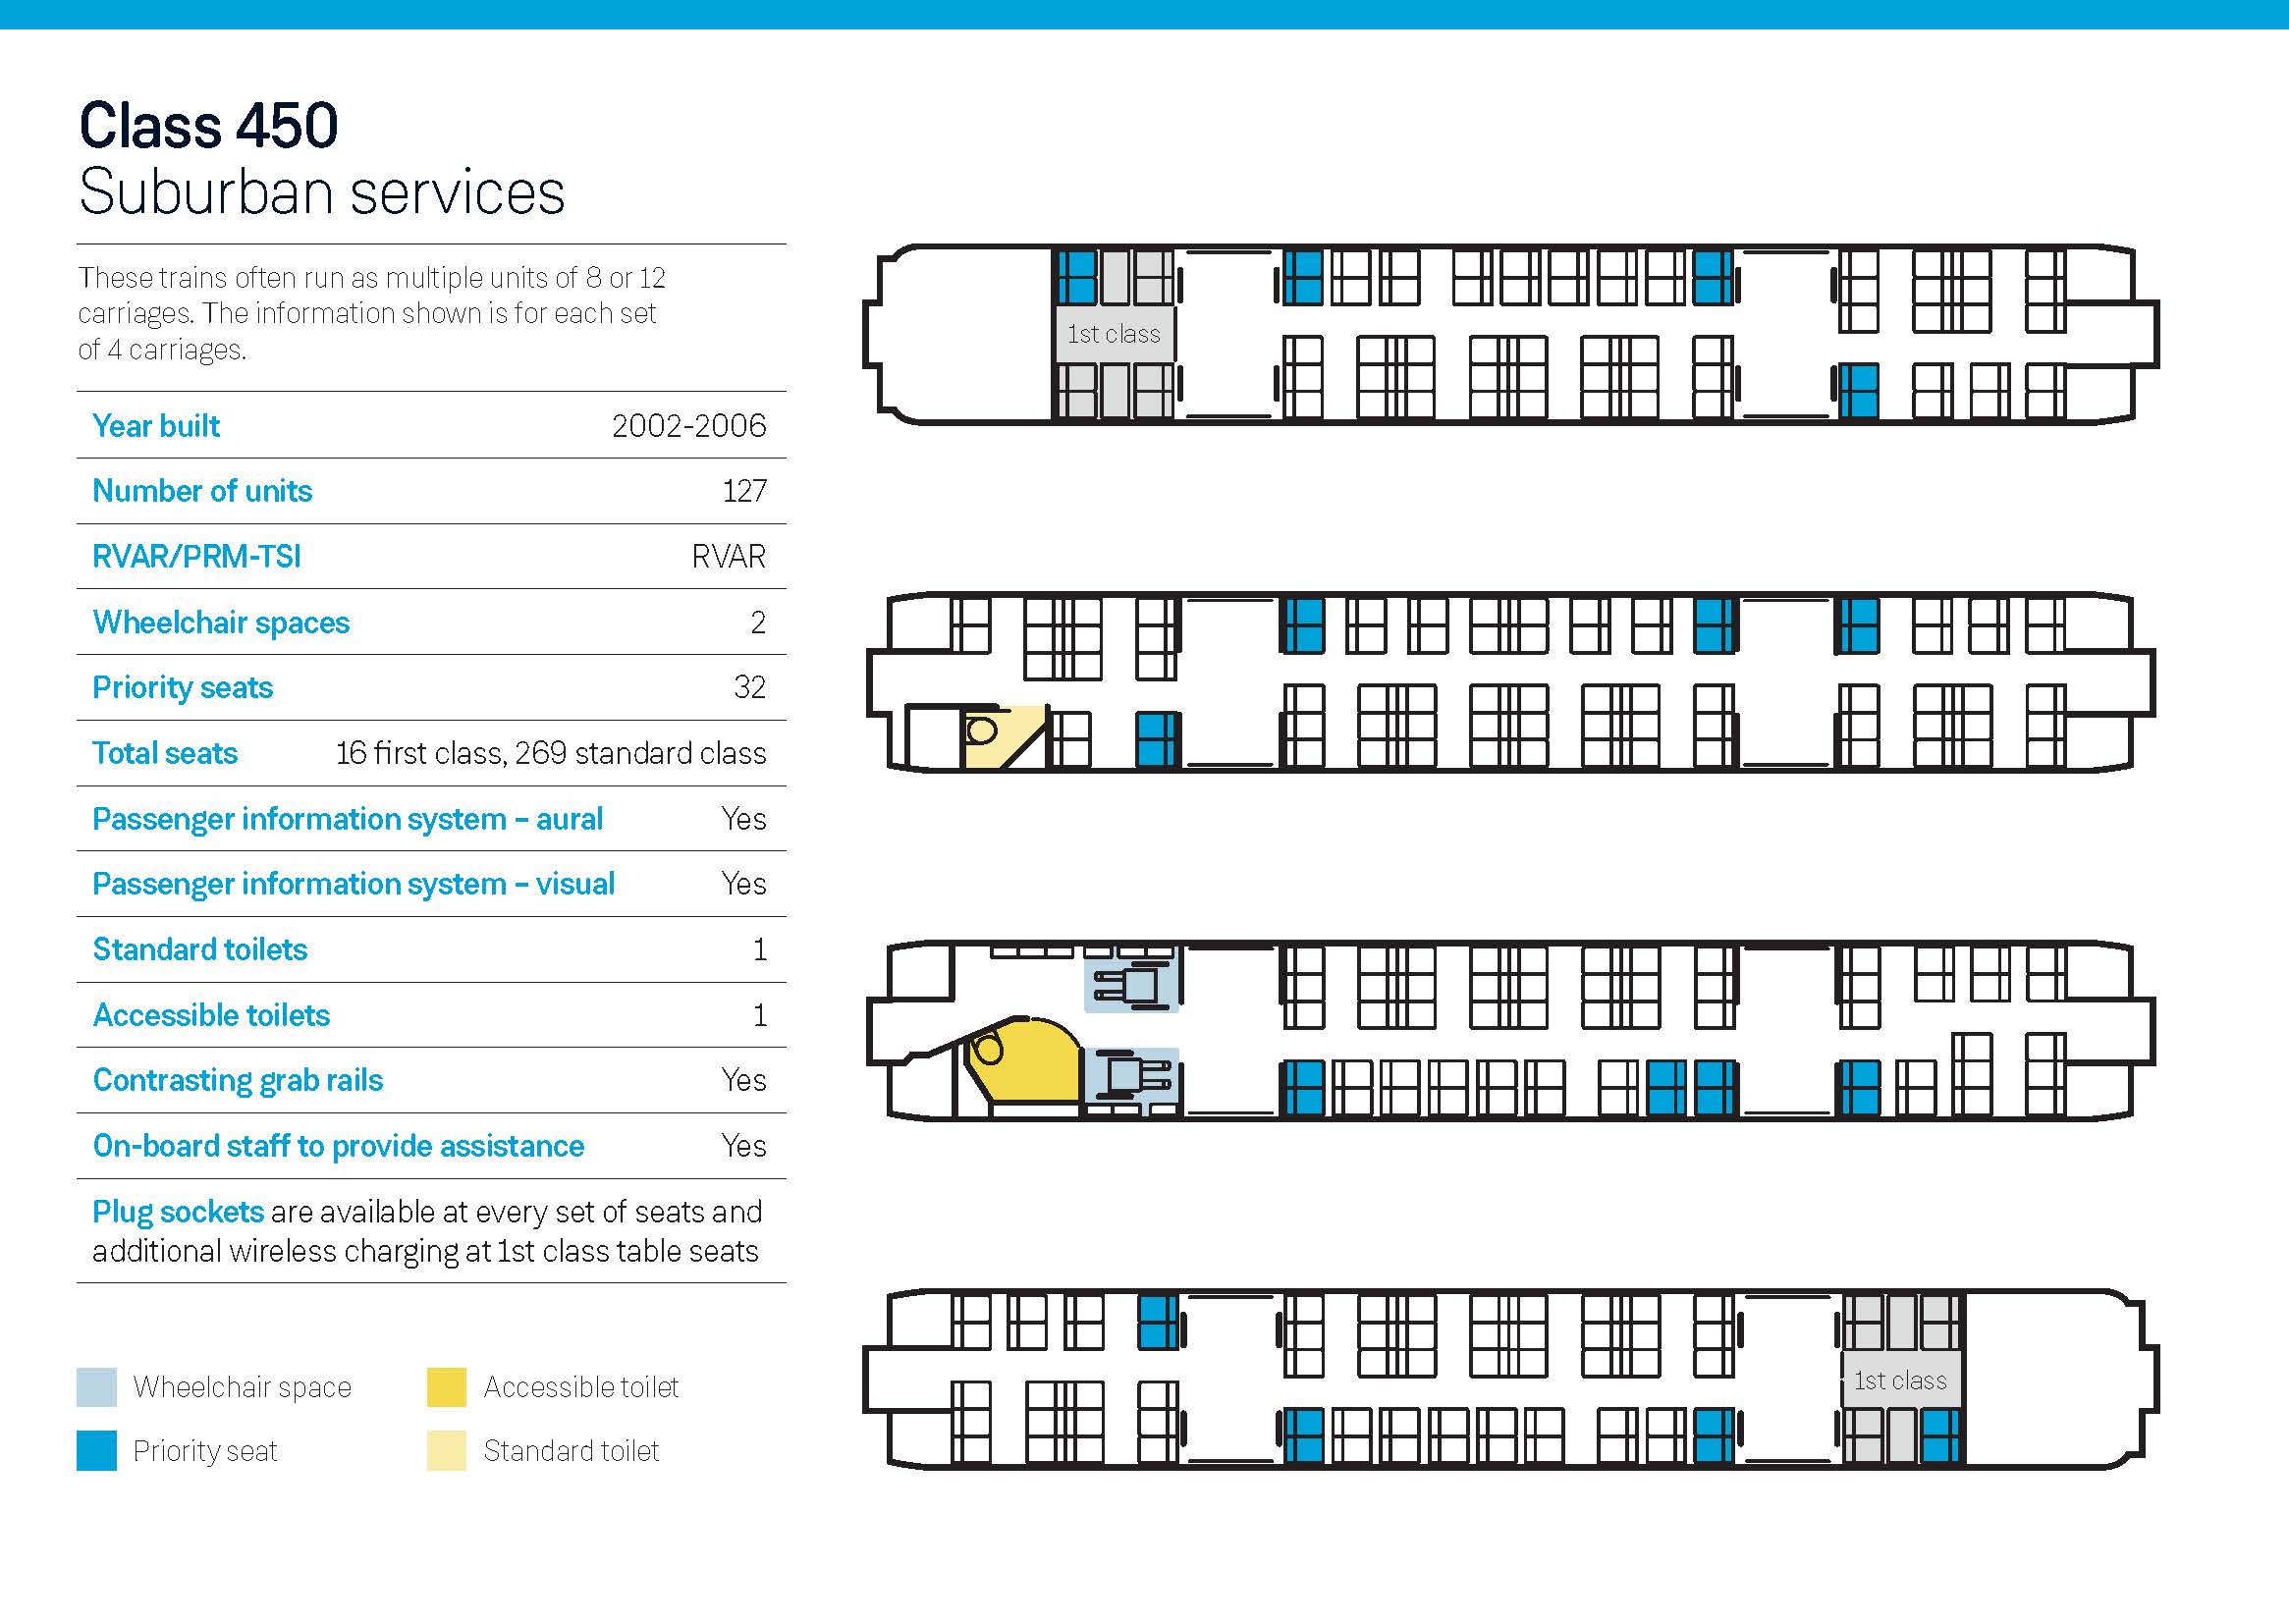 Class 450 Carriage Layout